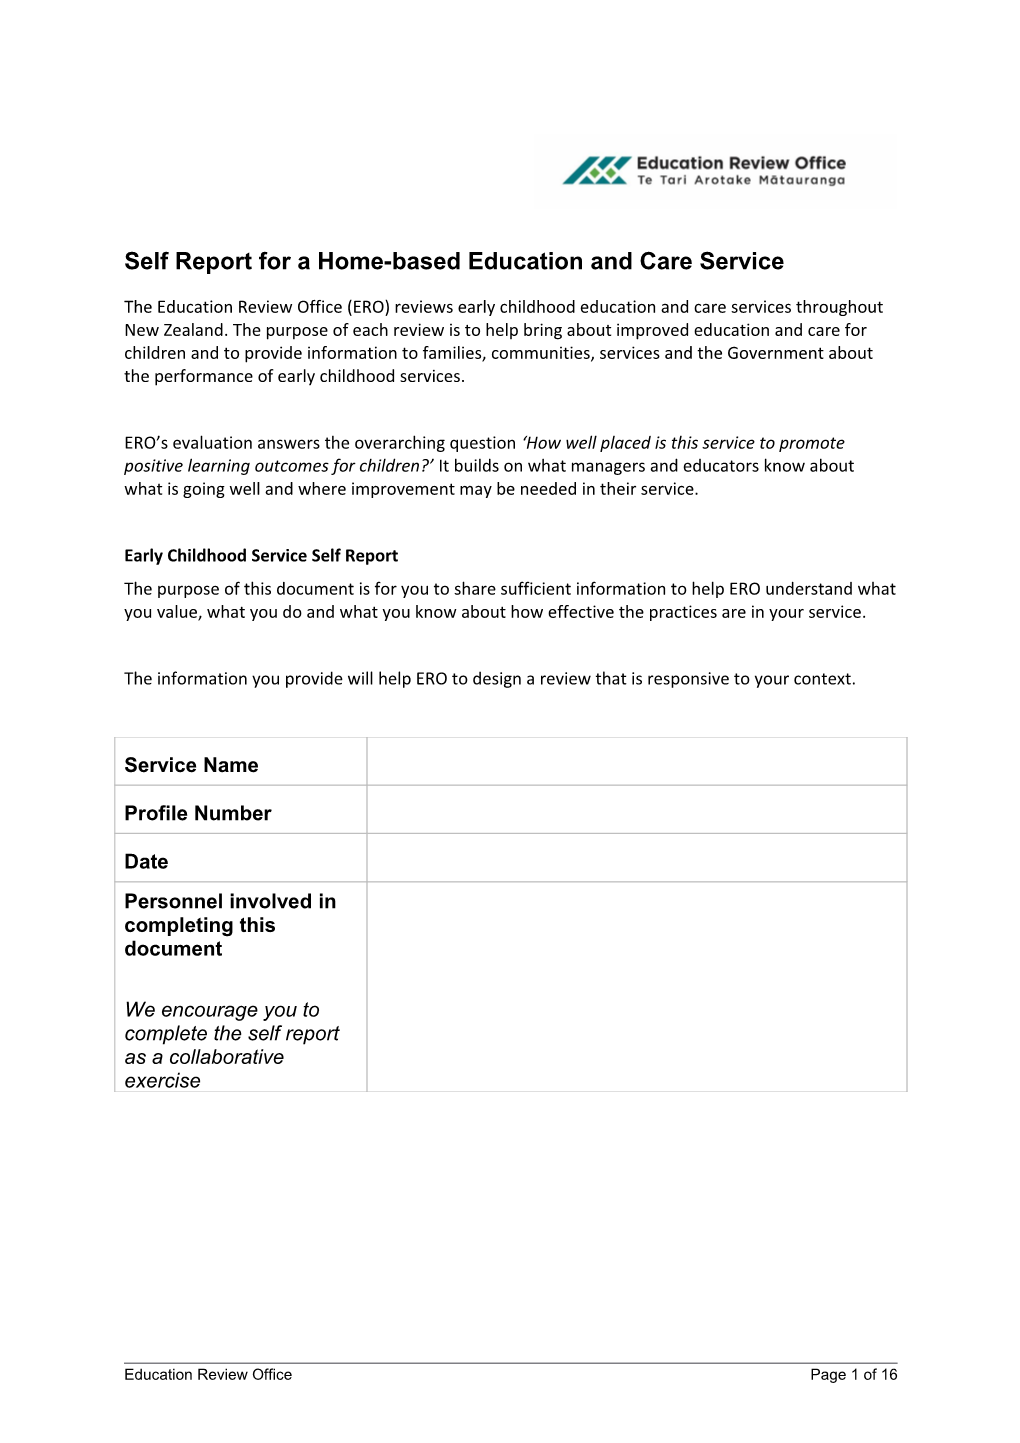 Self Report for a Home-Based Education and Care Service